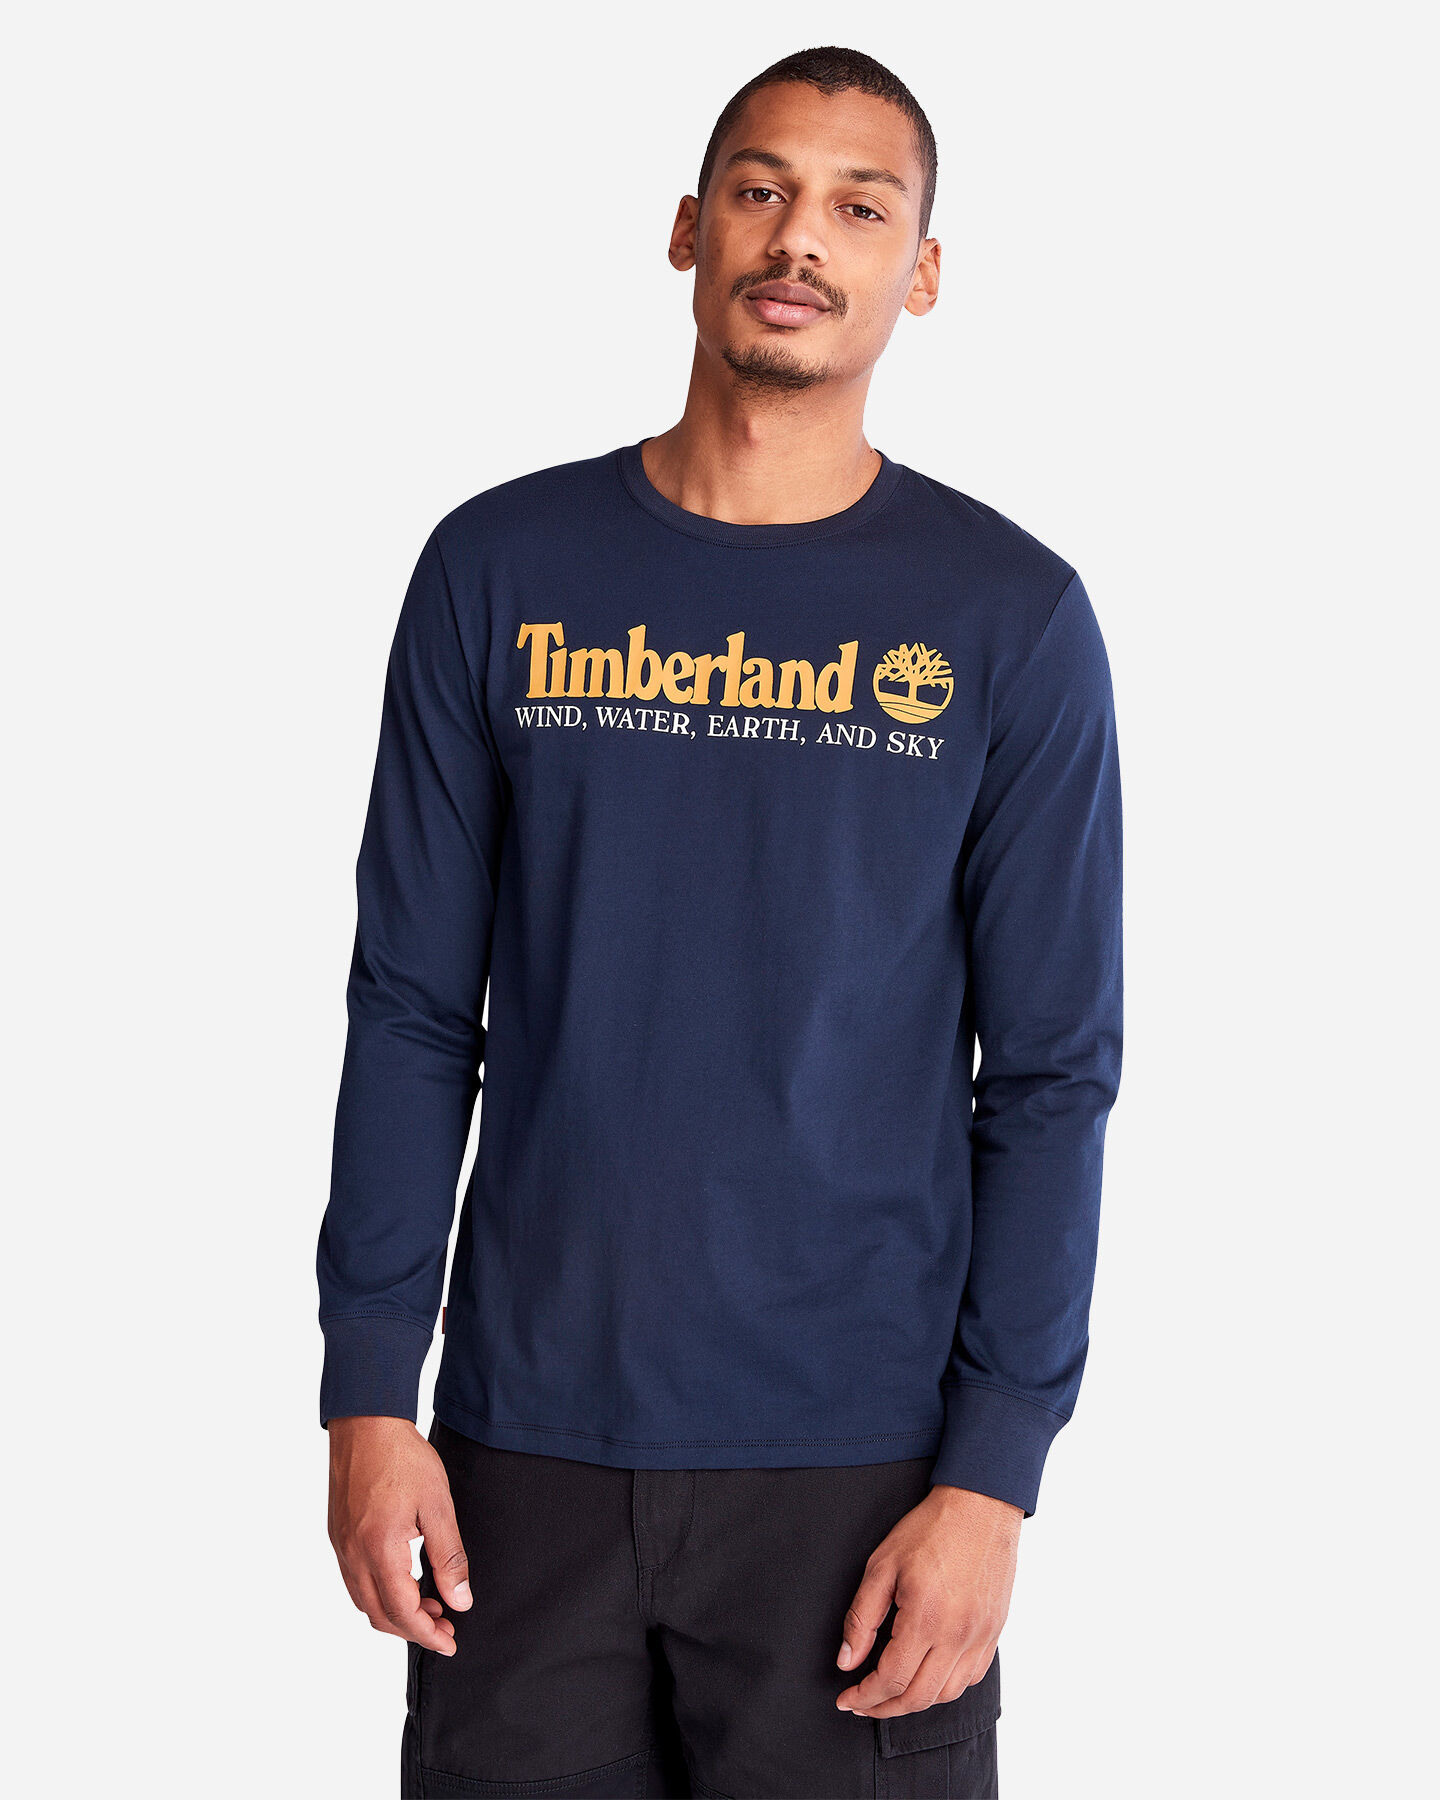  T-Shirt TIMBERLAND LINEAR LOGO M S4115299|4331|S scatto 1